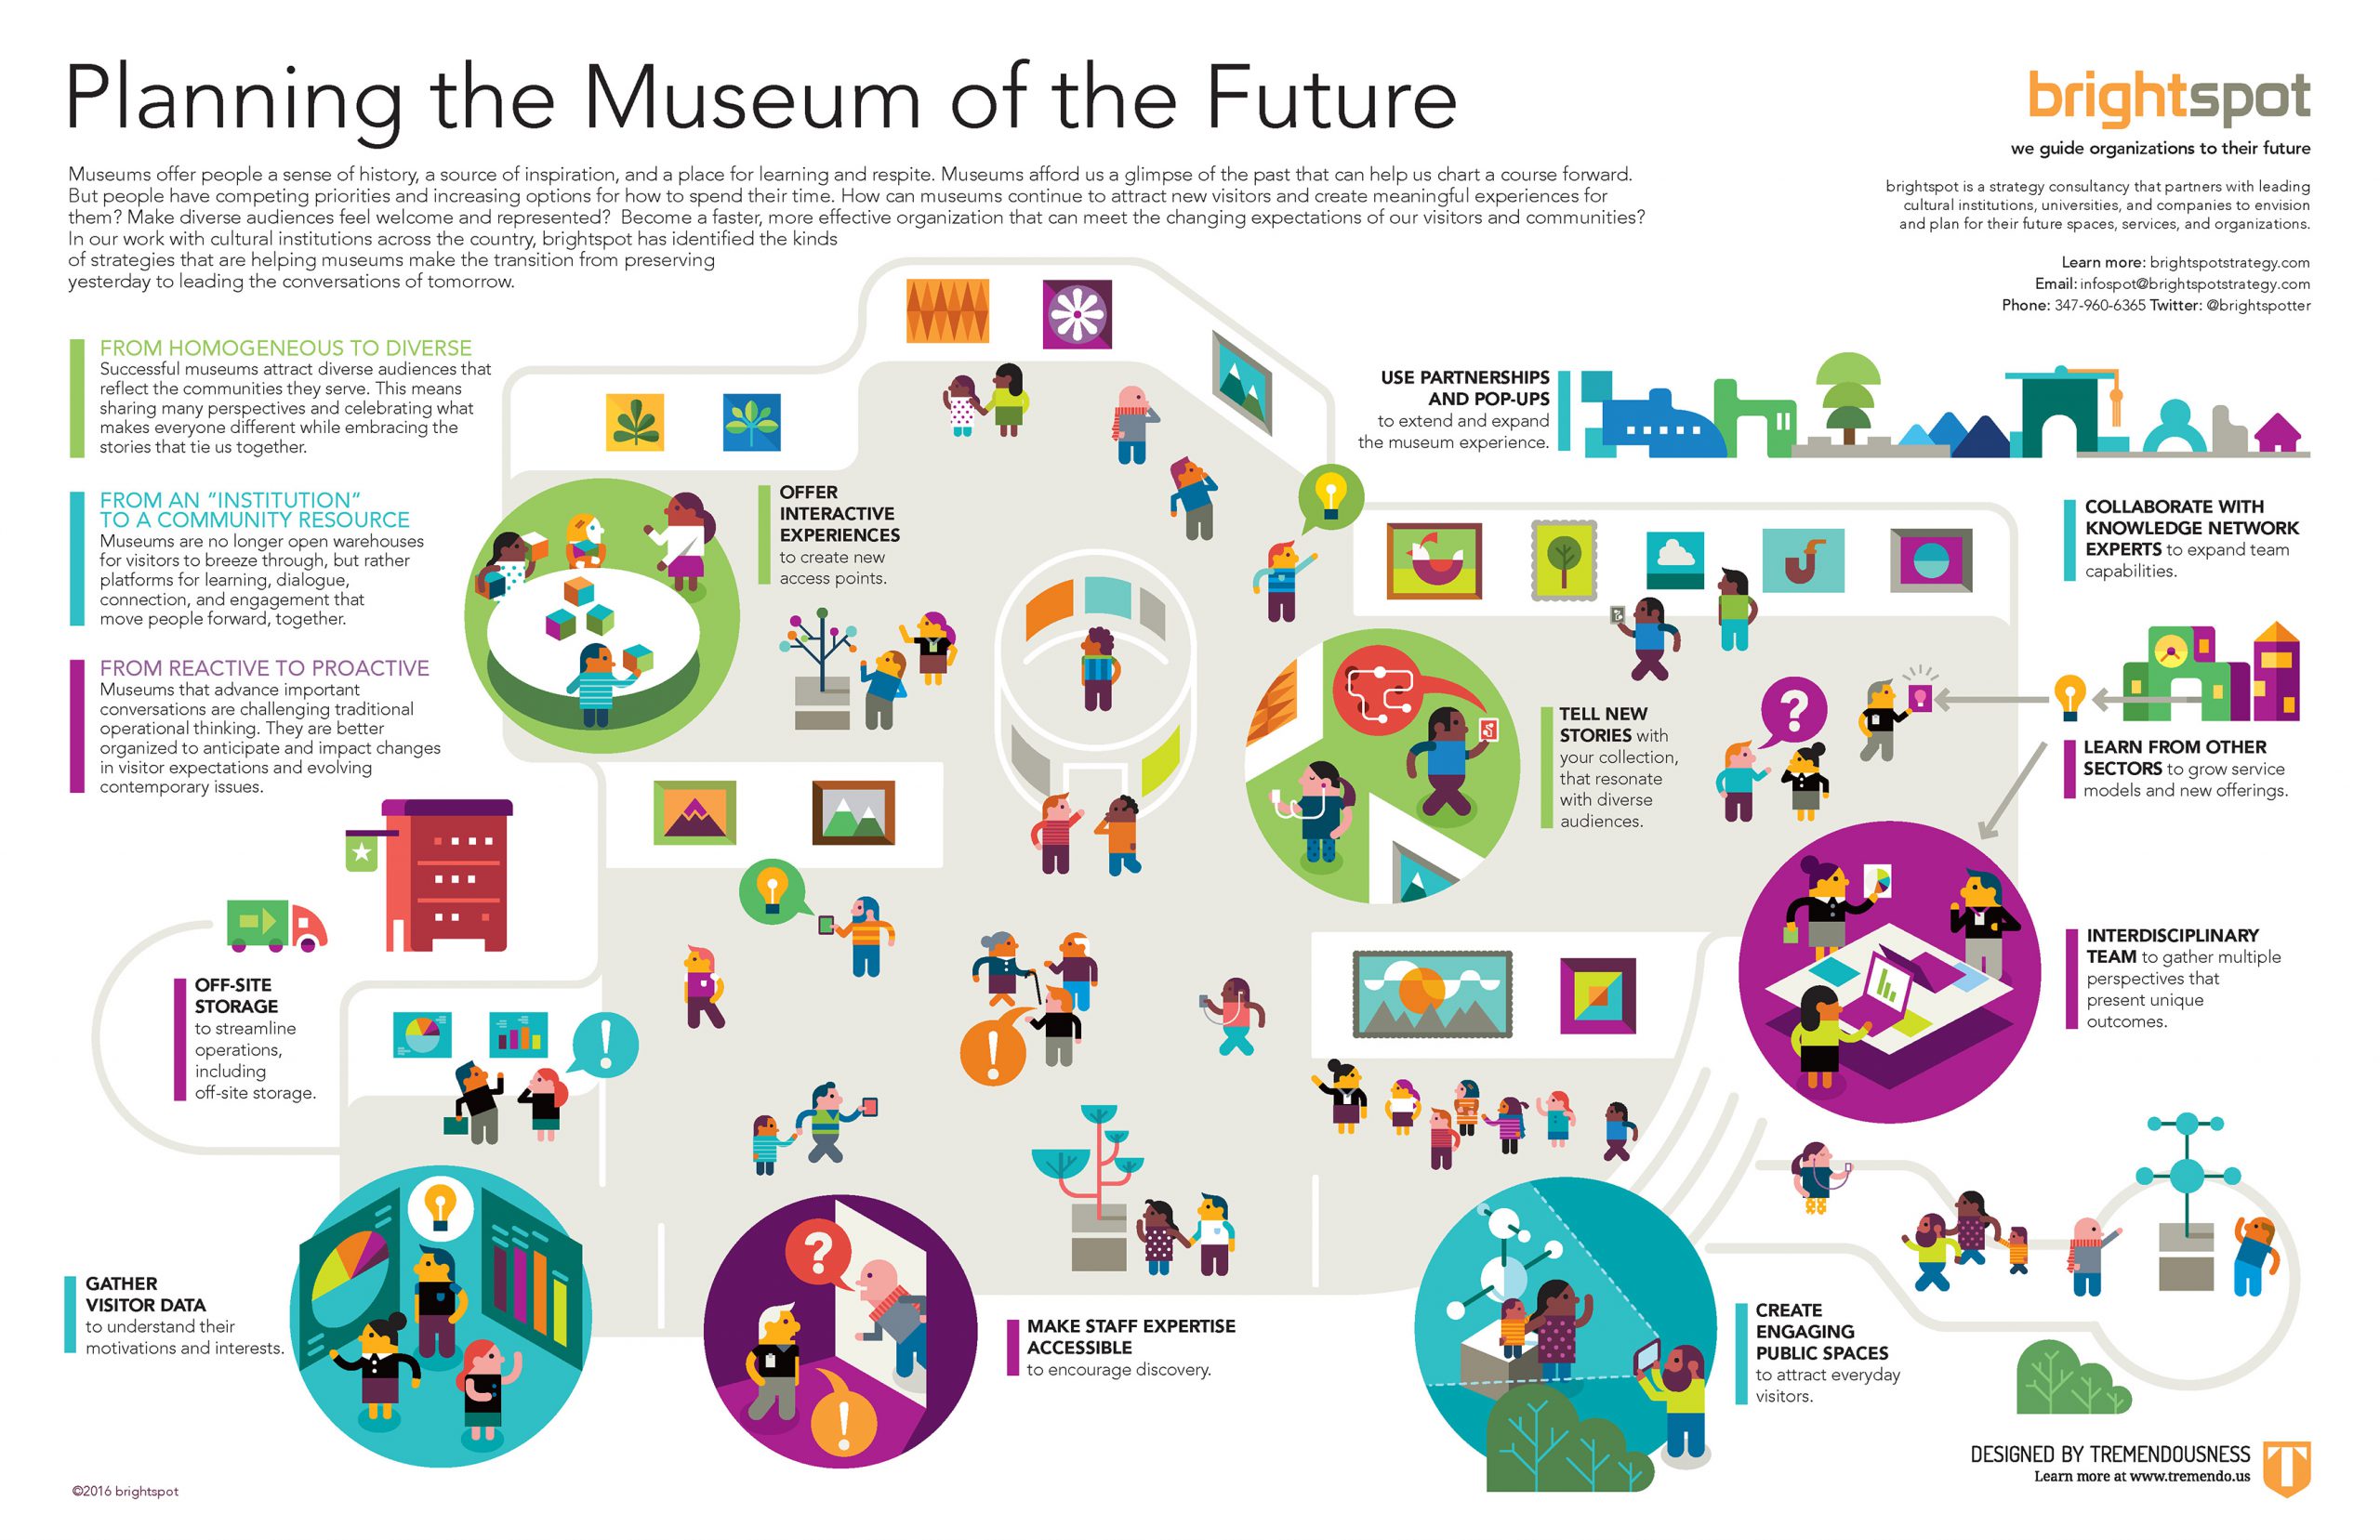 brightspot - Planning the Museum of the Future